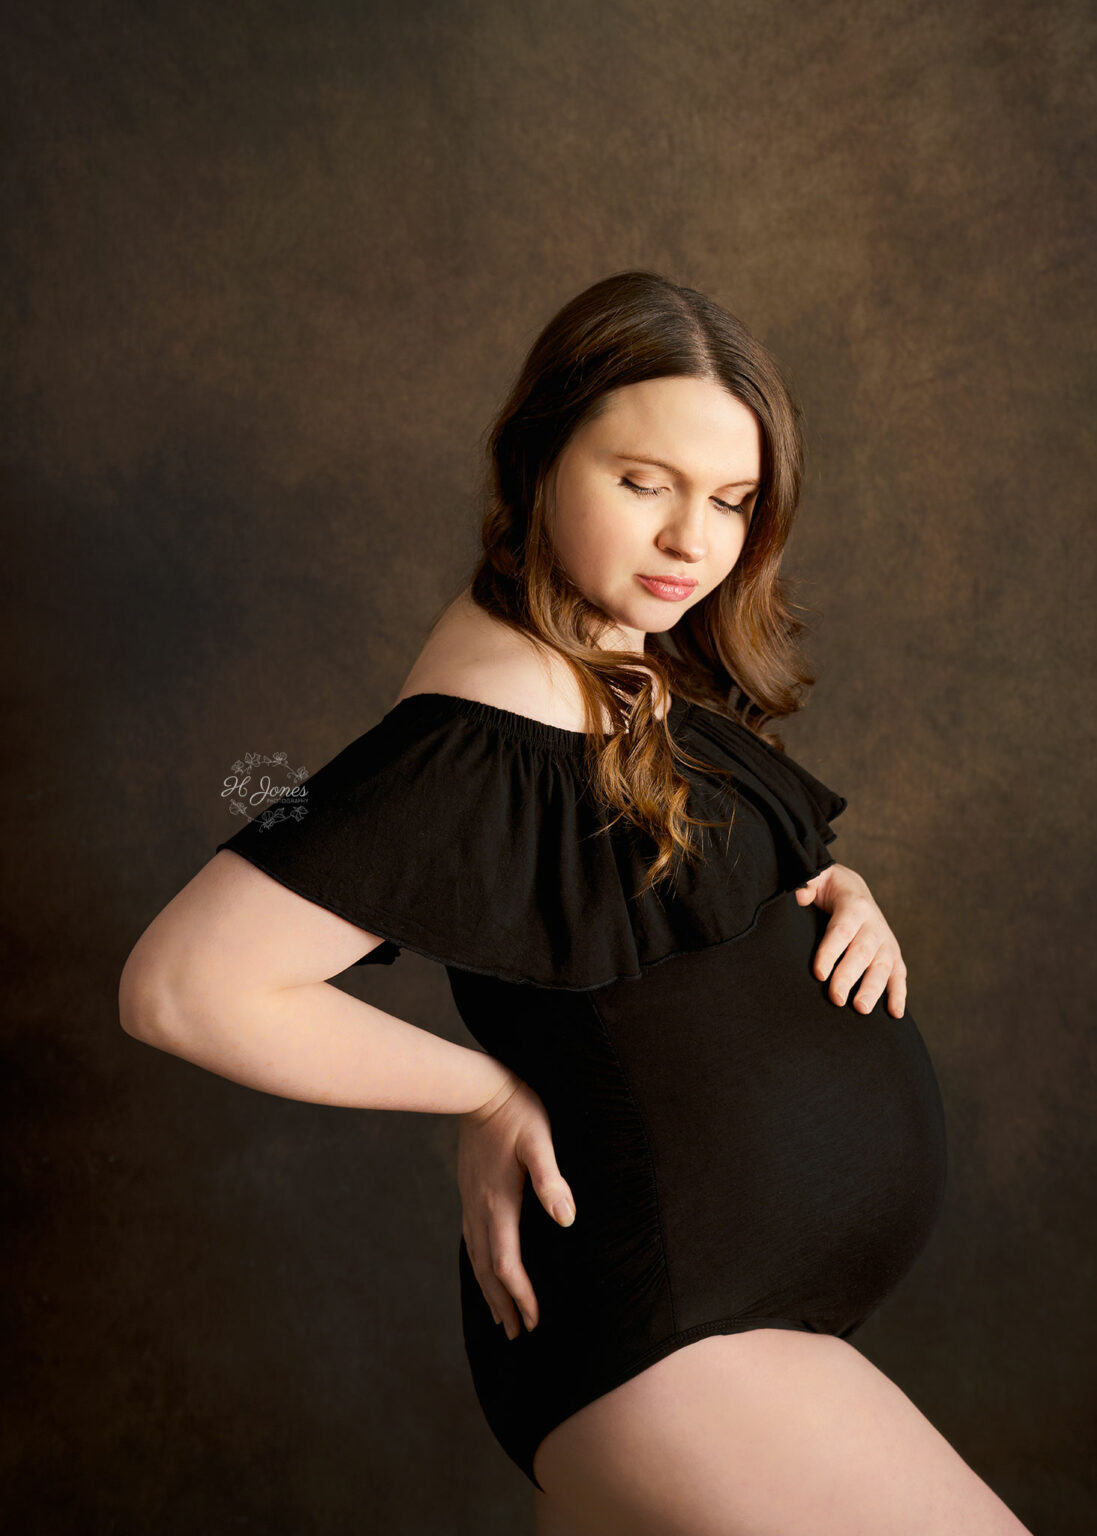 Timeless image of pregnant woman posing in a black maternity bodysuit.